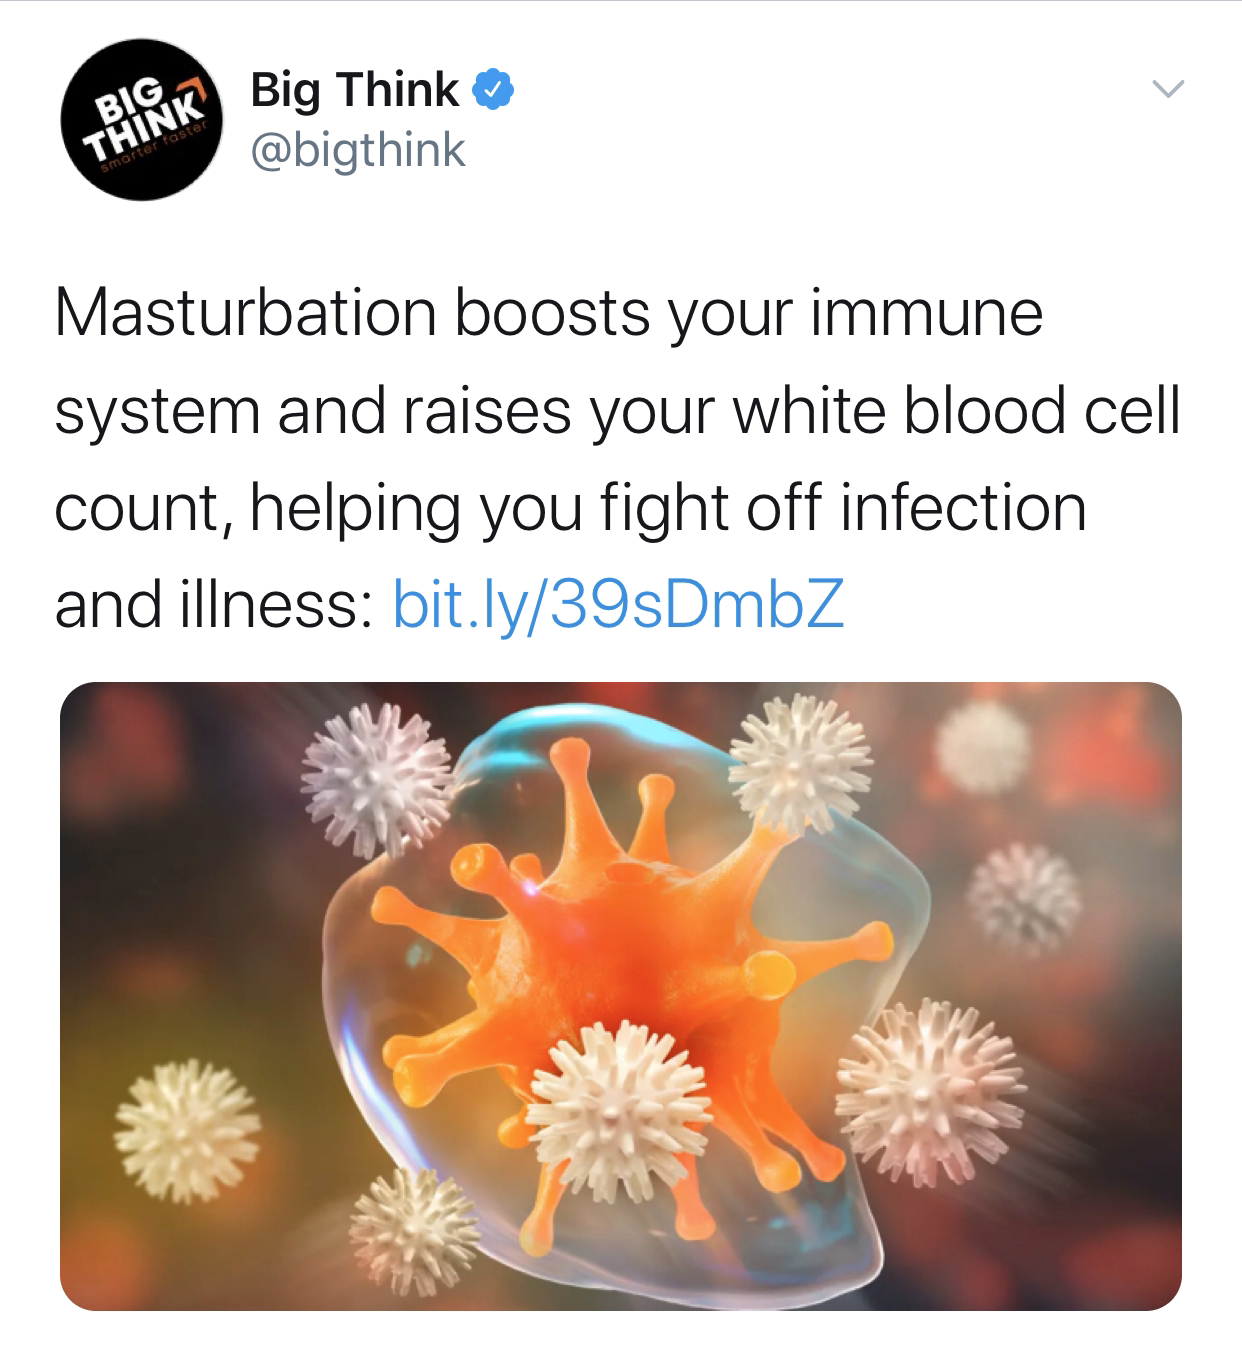 immune system attacks virus - Trink Big Think Masturbation boosts your immune system and raises your white blood cell count, helping you fight off infection and illness bit.ly39sDmbZ